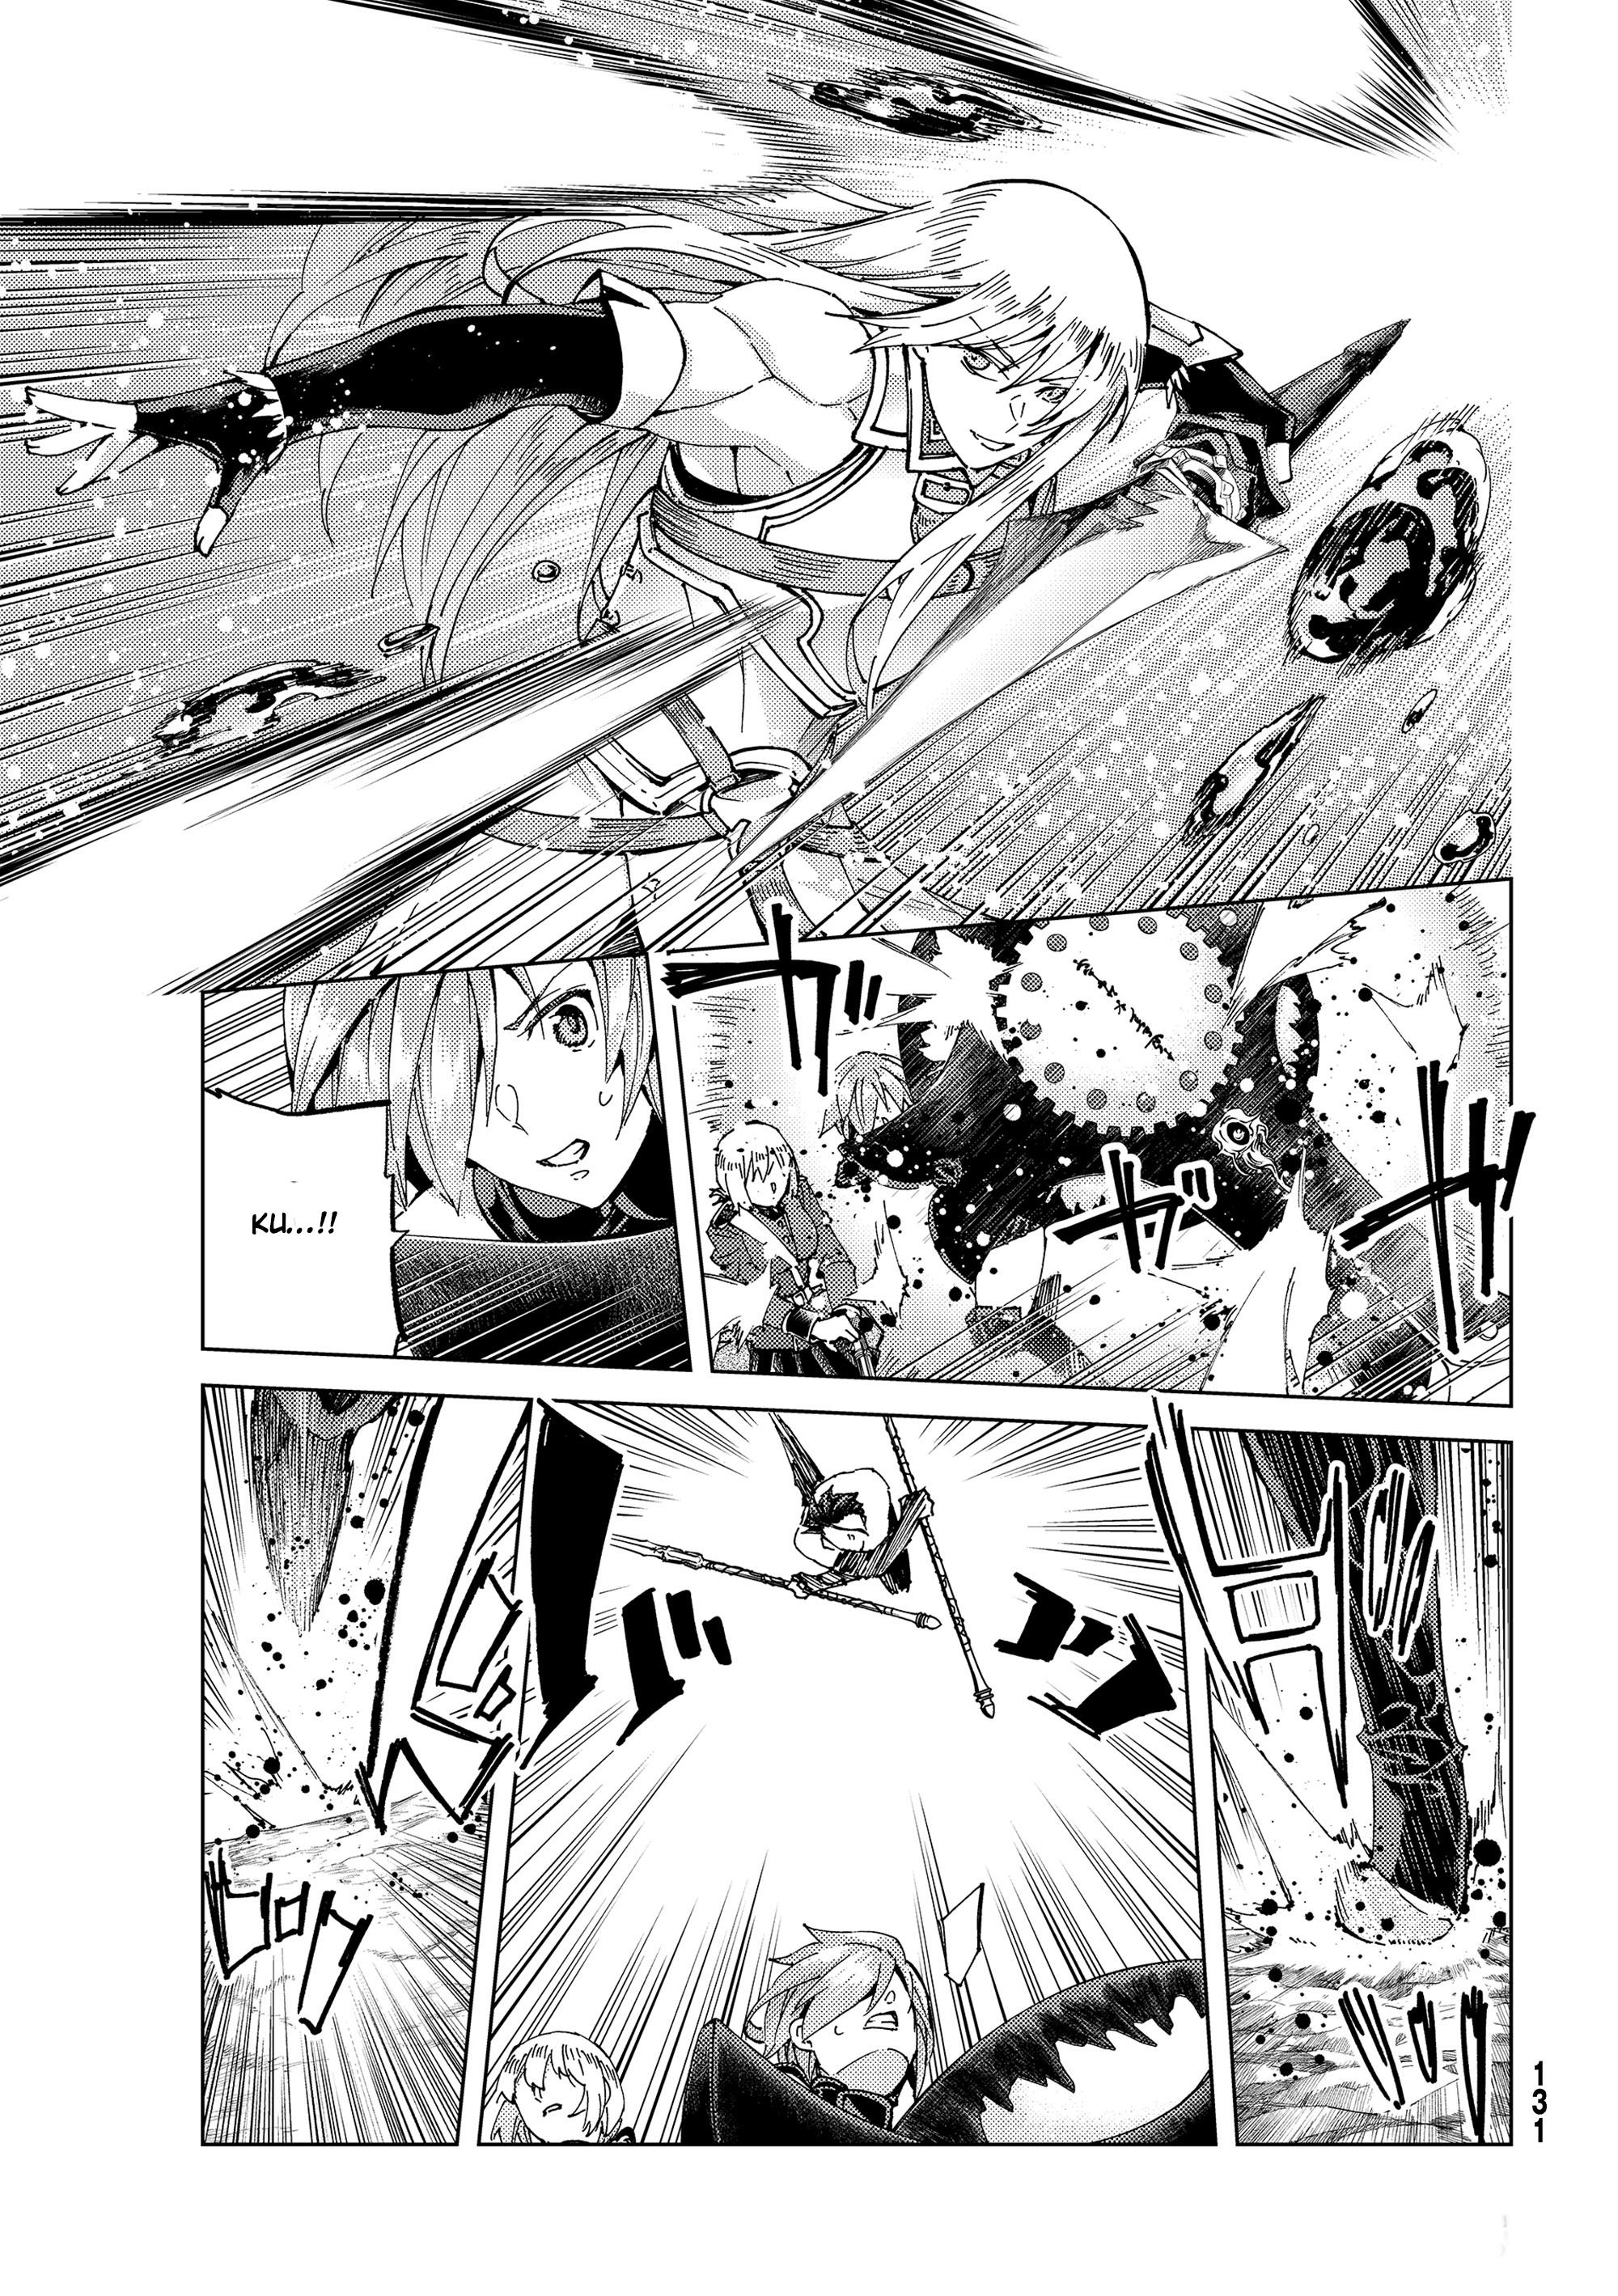 Fate/grand Order -Turas Réalta- Vol.12 Chapter 52: North American Myth War – Middle, Part Iii - Picture 1